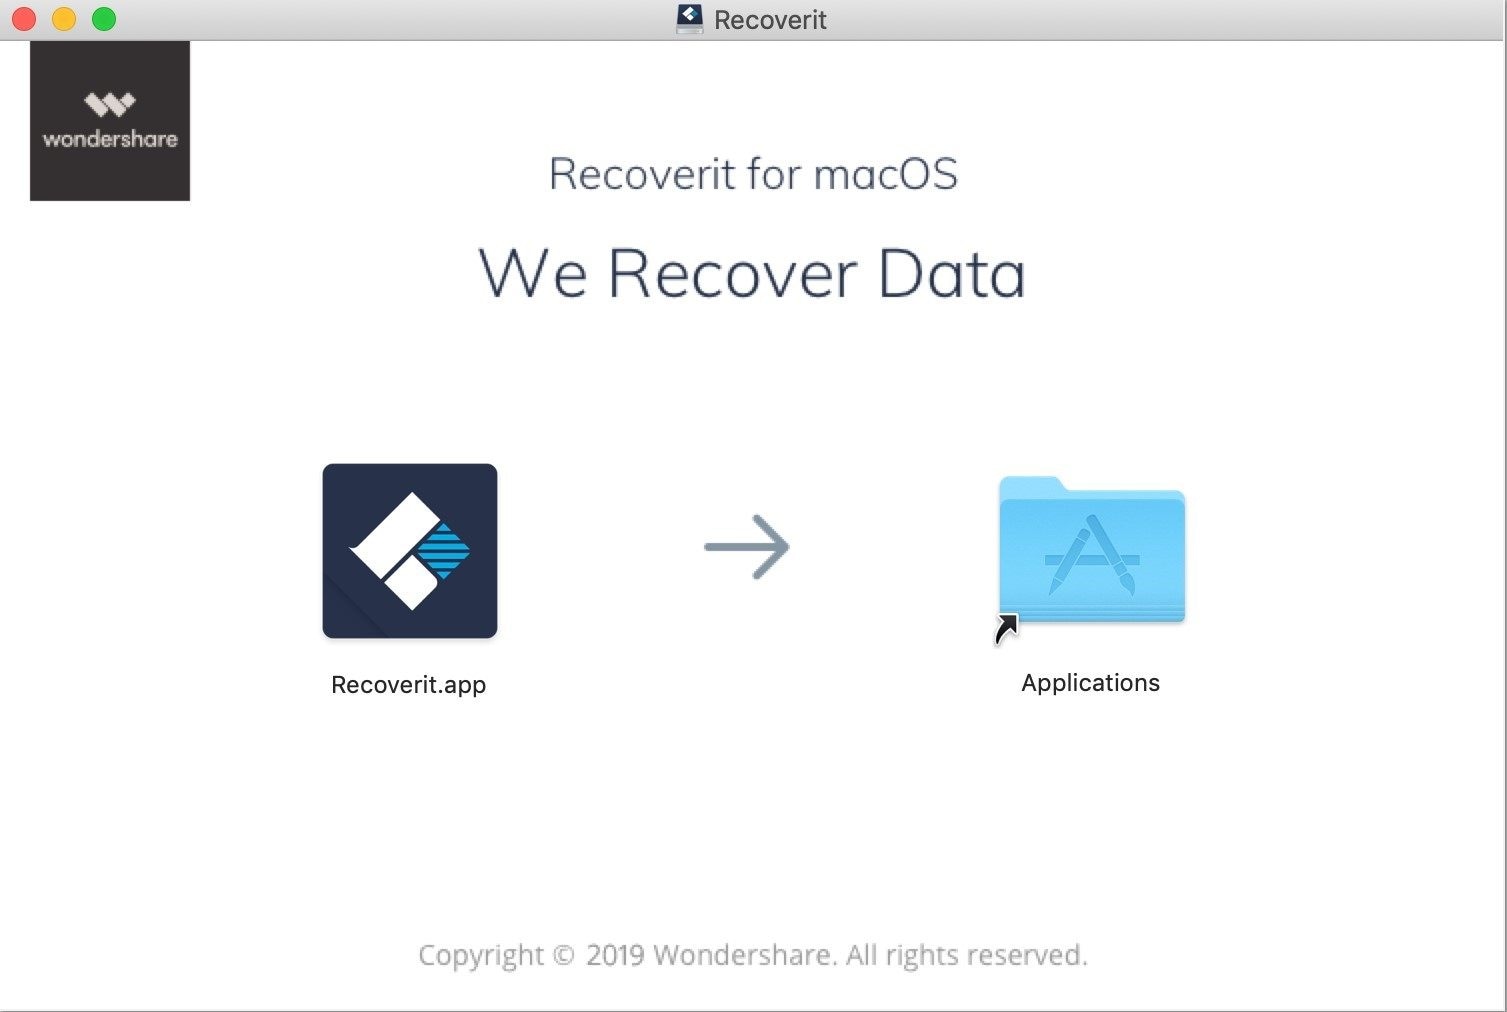 drag recoverit to the applications